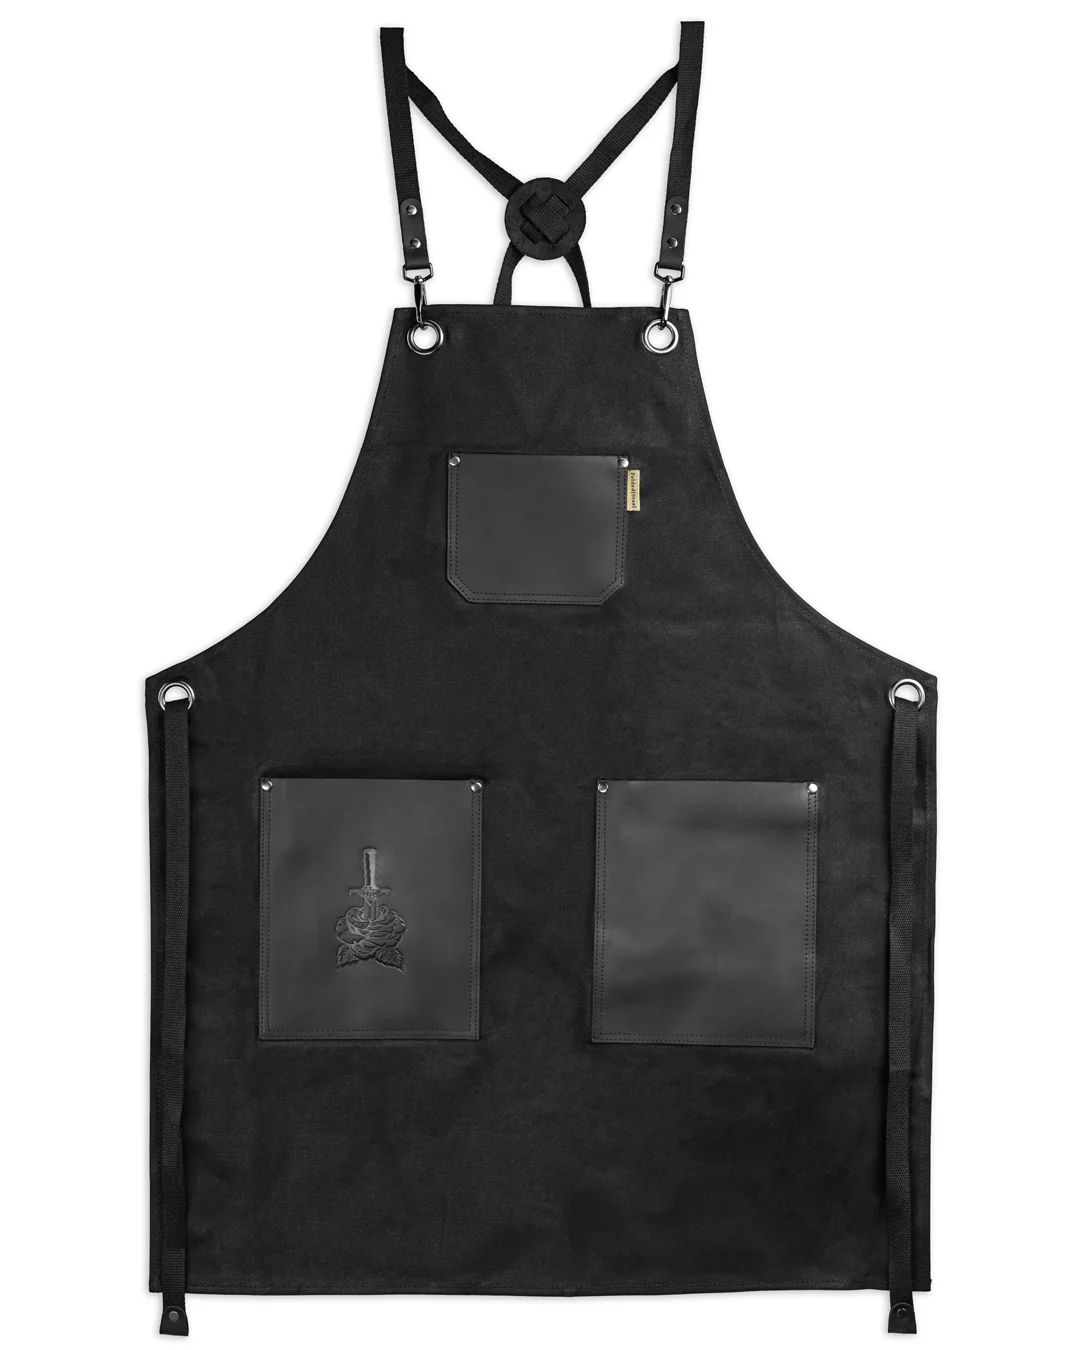 Chef Apron | Black Waxed Canvas + Genuine Leather | Folded Steel